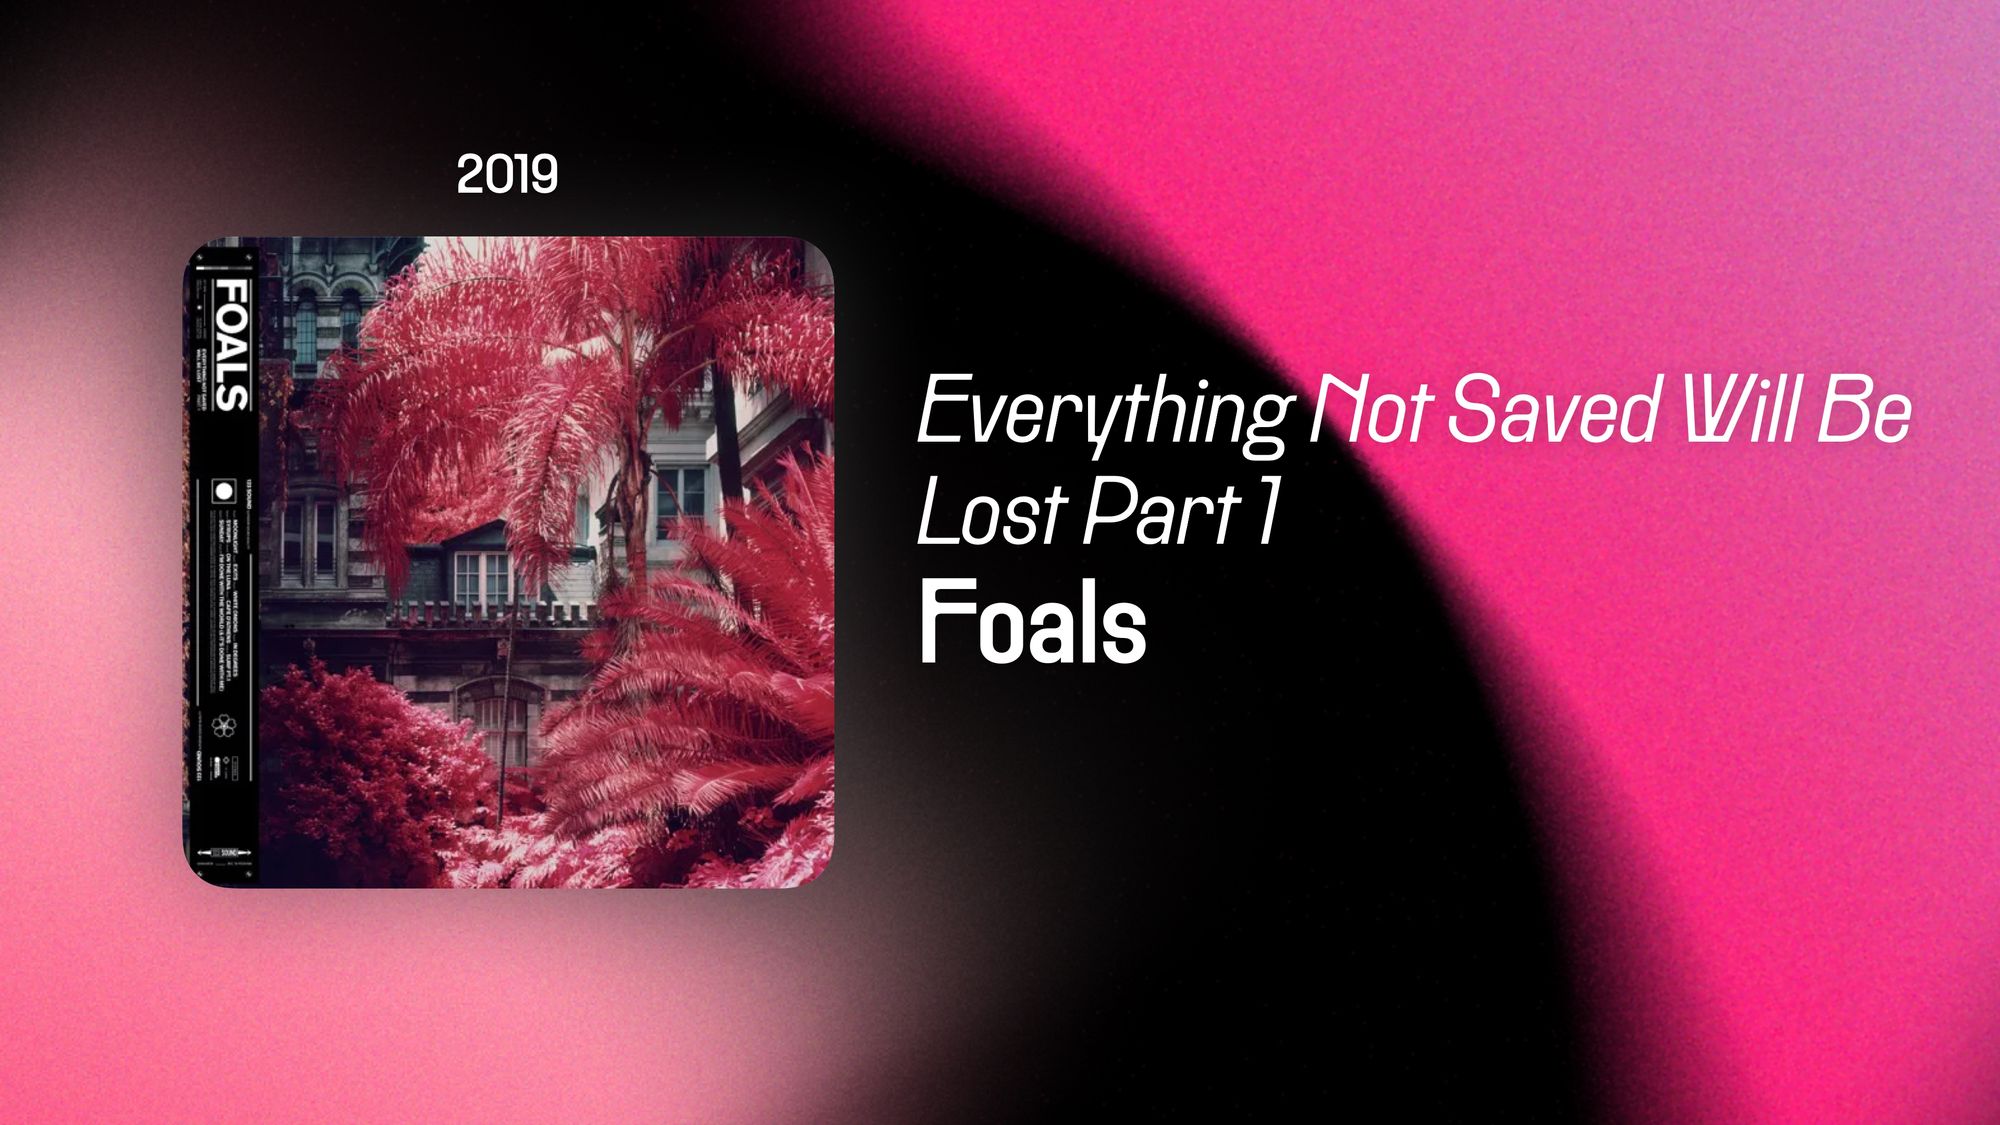 Everything Not Saved with be Lost Part 1 (365 Albums)